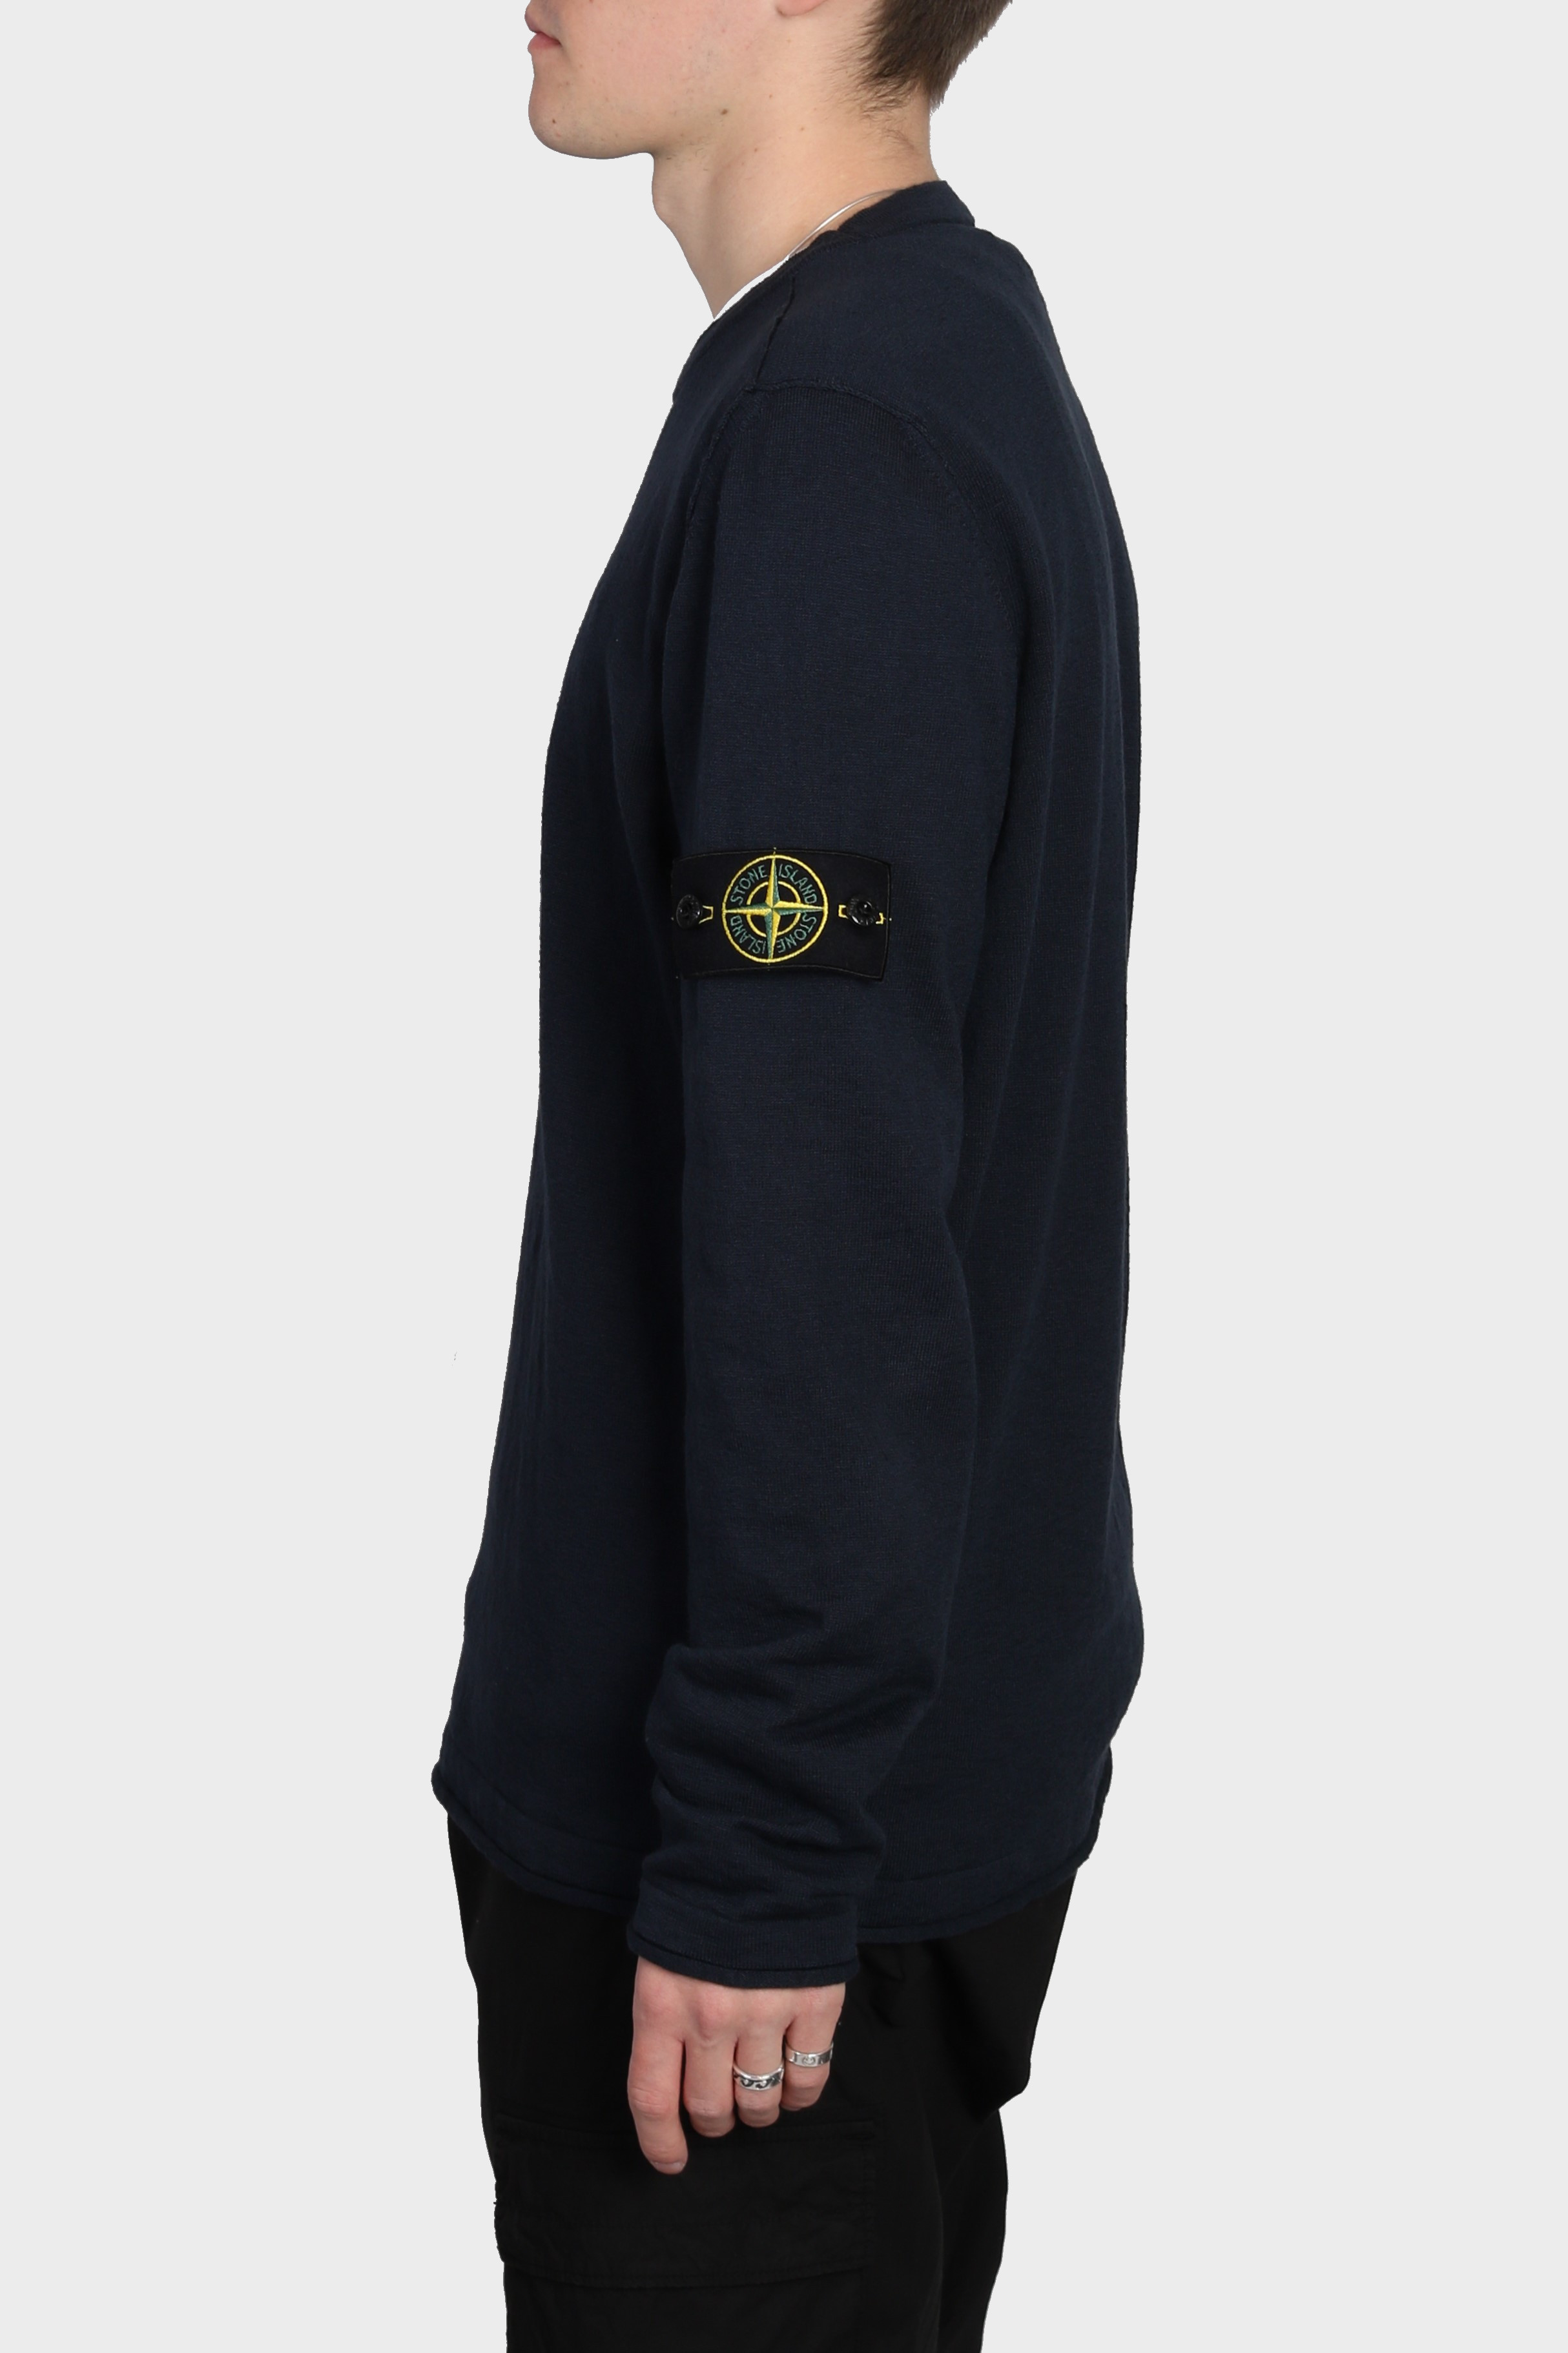 STONE ISLAND Summer Knit Pullover in Navy L